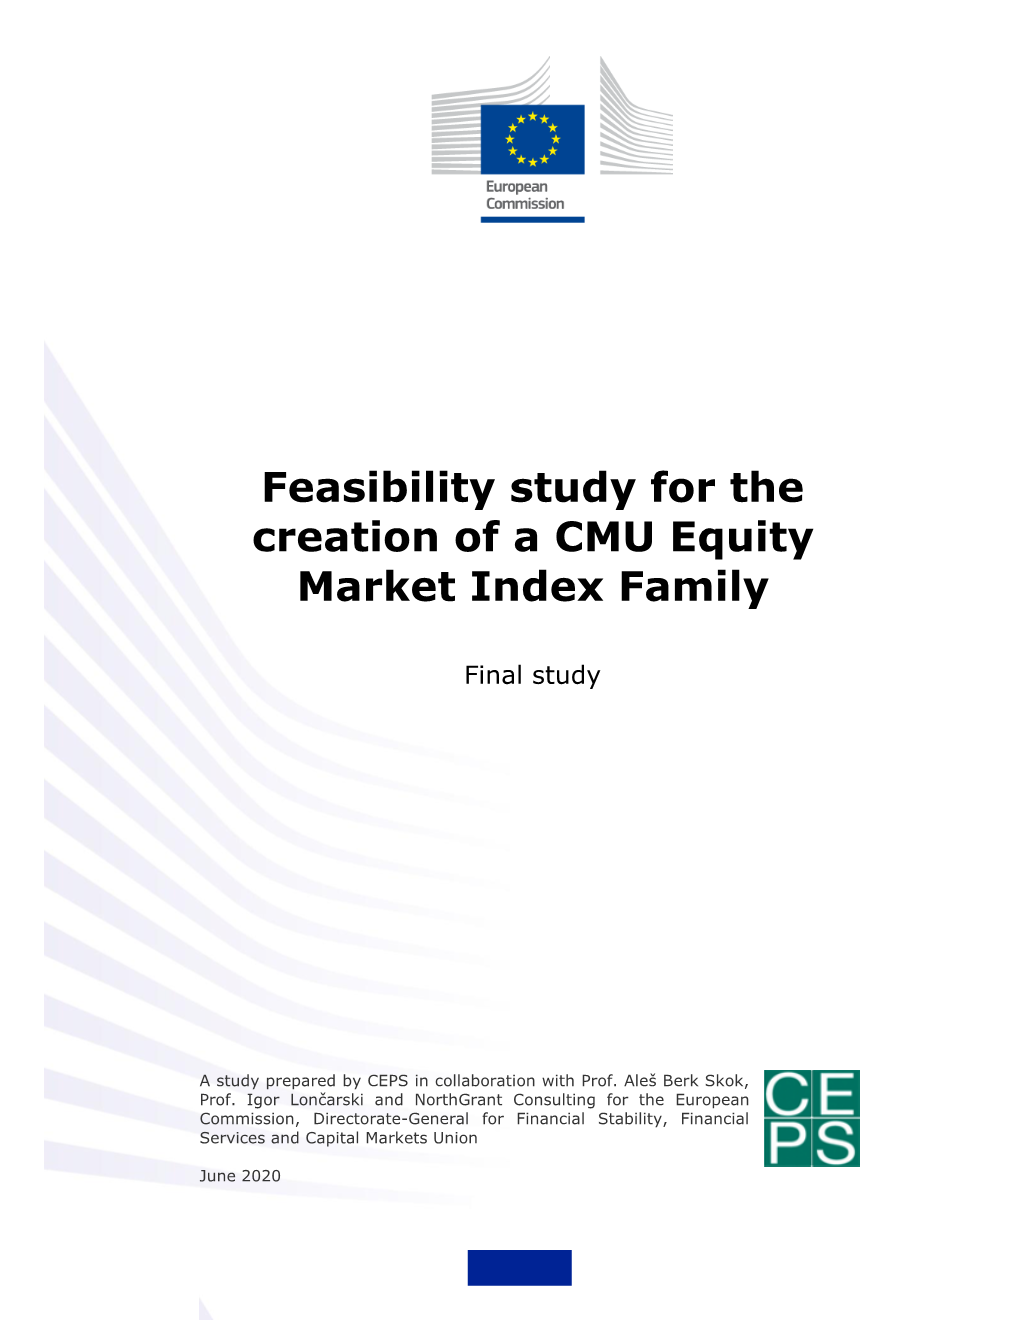 Feasibility Study for the Creation of a CMU Equity Market Index Family